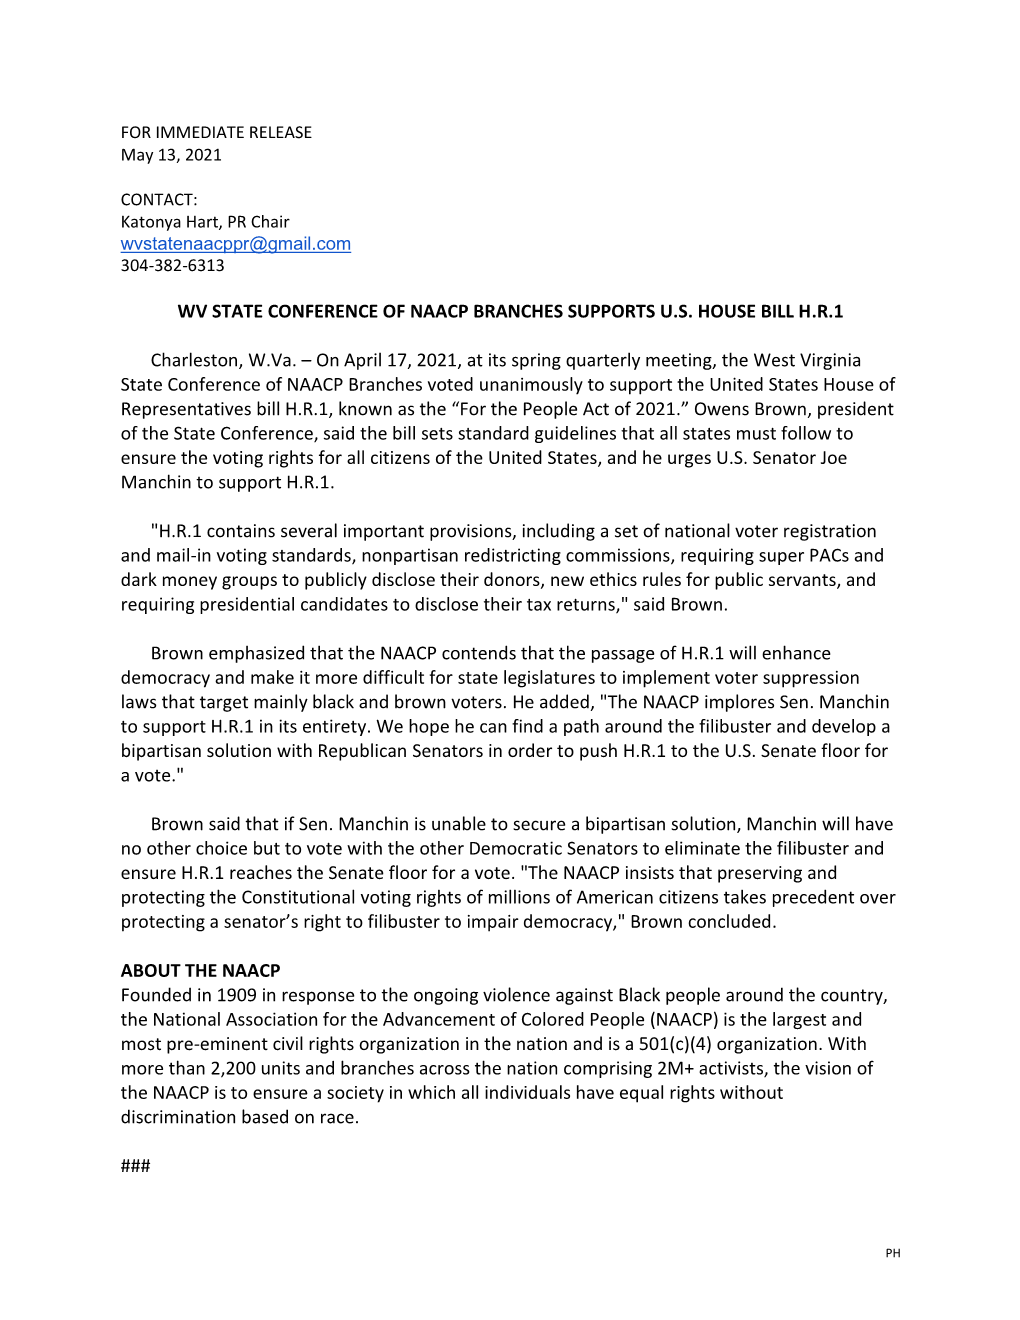 WV NAACP HR1 Press Release